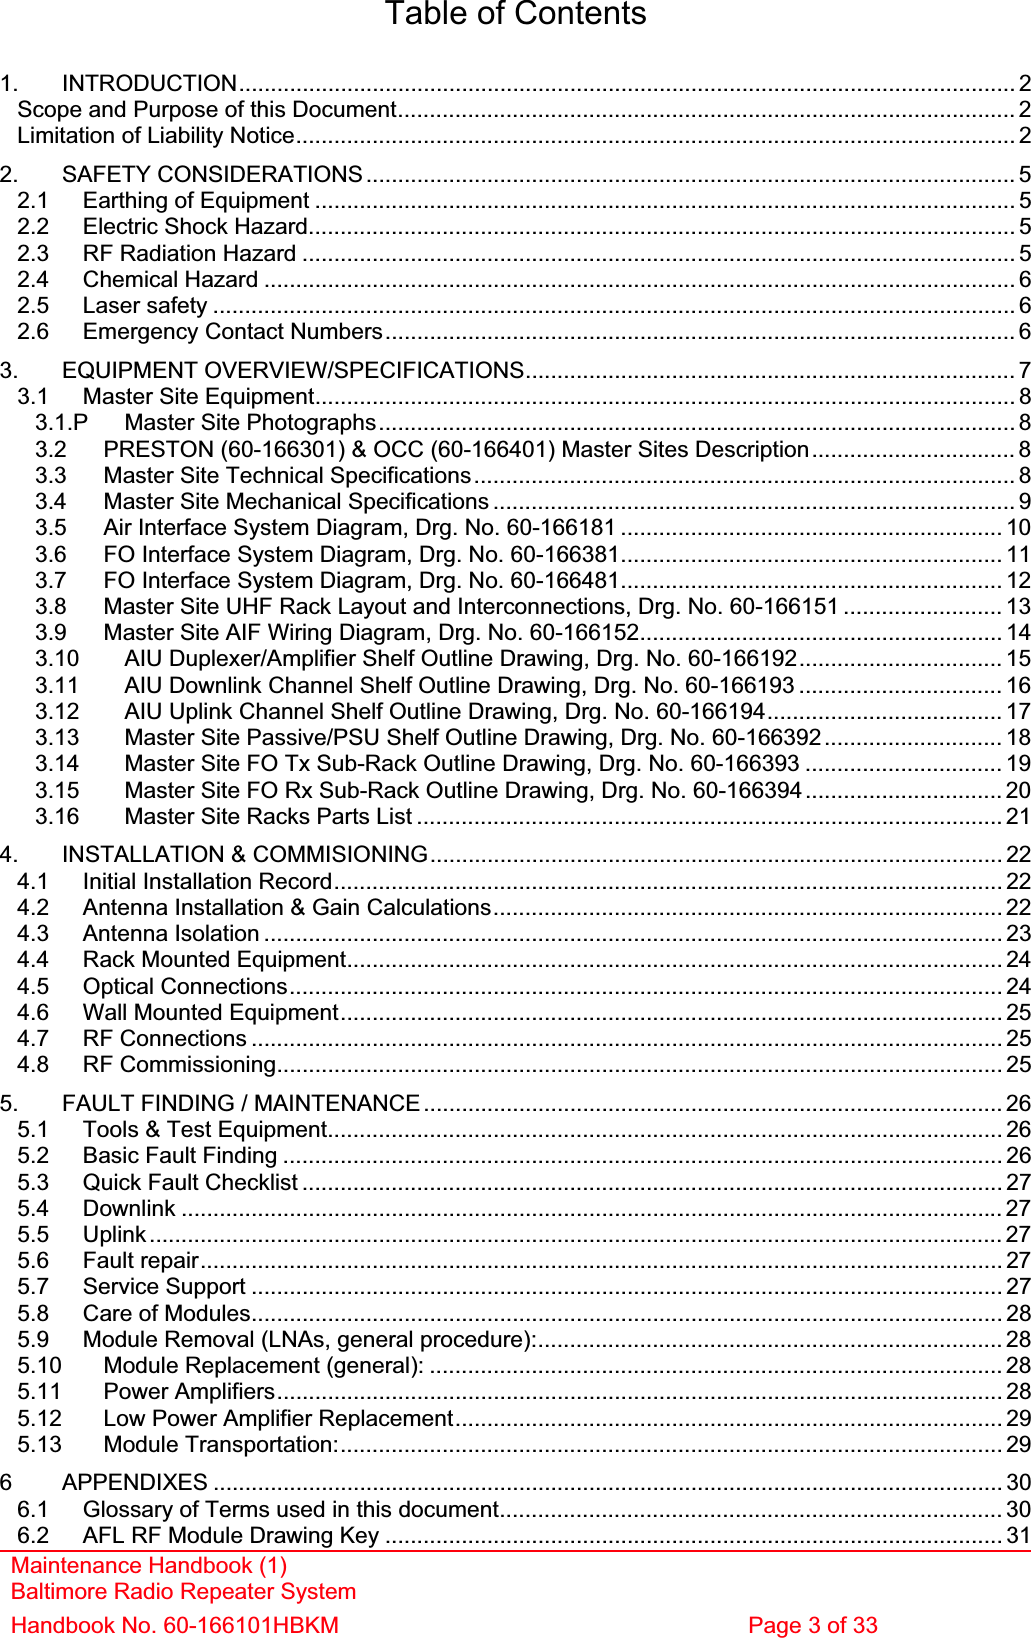 Maintenance Handbook (1) Baltimore Radio Repeater System Handbook No. 60-166101HBKM  Page 3 of 33 Table of Contents 1. INTRODUCTION.......................................................................................................................... 2Scope and Purpose of this Document................................................................................................. 2Limitation of Liability Notice................................................................................................................. 22. SAFETY CONSIDERATIONS...................................................................................................... 52.1 Earthing of Equipment .............................................................................................................. 52.2 Electric Shock Hazard............................................................................................................... 52.3 RF Radiation Hazard ................................................................................................................ 52.4 Chemical Hazard ...................................................................................................................... 62.5 Laser safety .............................................................................................................................. 62.6 Emergency Contact Numbers................................................................................................... 63. EQUIPMENT OVERVIEW/SPECIFICATIONS............................................................................. 73.1 Master Site Equipment.............................................................................................................. 83.1.P Master Site Photographs....................................................................................................83.2 PRESTON (60-166301) &amp; OCC (60-166401) Master Sites Description................................ 83.3 Master Site Technical Specifications..................................................................................... 83.4 Master Site Mechanical Specifications .................................................................................. 93.5 Air Interface System Diagram, Drg. No. 60-166181 ............................................................ 103.6 FO Interface System Diagram, Drg. No. 60-166381............................................................ 113.7 FO Interface System Diagram, Drg. No. 60-166481............................................................ 123.8 Master Site UHF Rack Layout and Interconnections, Drg. No. 60-166151 ......................... 133.9 Master Site AIF Wiring Diagram, Drg. No. 60-166152......................................................... 143.10 AIU Duplexer/Amplifier Shelf Outline Drawing, Drg. No. 60-166192................................ 153.11 AIU Downlink Channel Shelf Outline Drawing, Drg. No. 60-166193 ................................ 163.12 AIU Uplink Channel Shelf Outline Drawing, Drg. No. 60-166194..................................... 173.13 Master Site Passive/PSU Shelf Outline Drawing, Drg. No. 60-166392............................ 183.14 Master Site FO Tx Sub-Rack Outline Drawing, Drg. No. 60-166393 ............................... 193.15 Master Site FO Rx Sub-Rack Outline Drawing, Drg. No. 60-166394............................... 203.16 Master Site Racks Parts List ............................................................................................ 214. INSTALLATION &amp; COMMISIONING.......................................................................................... 224.1 Initial Installation Record......................................................................................................... 224.2 Antenna Installation &amp; Gain Calculations................................................................................ 224.3 Antenna Isolation .................................................................................................................... 234.4 Rack Mounted Equipment.......................................................................................................244.5 Optical Connections................................................................................................................ 244.6 Wall Mounted Equipment........................................................................................................ 254.7 RF Connections ...................................................................................................................... 254.8 RF Commissioning.................................................................................................................. 255. FAULT FINDING / MAINTENANCE ........................................................................................... 265.1 Tools &amp; Test Equipment.......................................................................................................... 265.2 Basic Fault Finding ................................................................................................................. 265.3 Quick Fault Checklist .............................................................................................................. 275.4 Downlink ................................................................................................................................. 275.5 Uplink...................................................................................................................................... 275.6 Fault repair.............................................................................................................................. 275.7 Service Support ...................................................................................................................... 275.8 Care of Modules...................................................................................................................... 285.9 Module Removal (LNAs, general procedure):......................................................................... 285.10 Module Replacement (general): .......................................................................................... 285.11 Power Amplifiers.................................................................................................................. 285.12 Low Power Amplifier Replacement...................................................................................... 295.13 Module Transportation:........................................................................................................ 296 APPENDIXES ............................................................................................................................ 306.1 Glossary of Terms used in this document............................................................................... 306.2 AFL RF Module Drawing Key ................................................................................................. 31